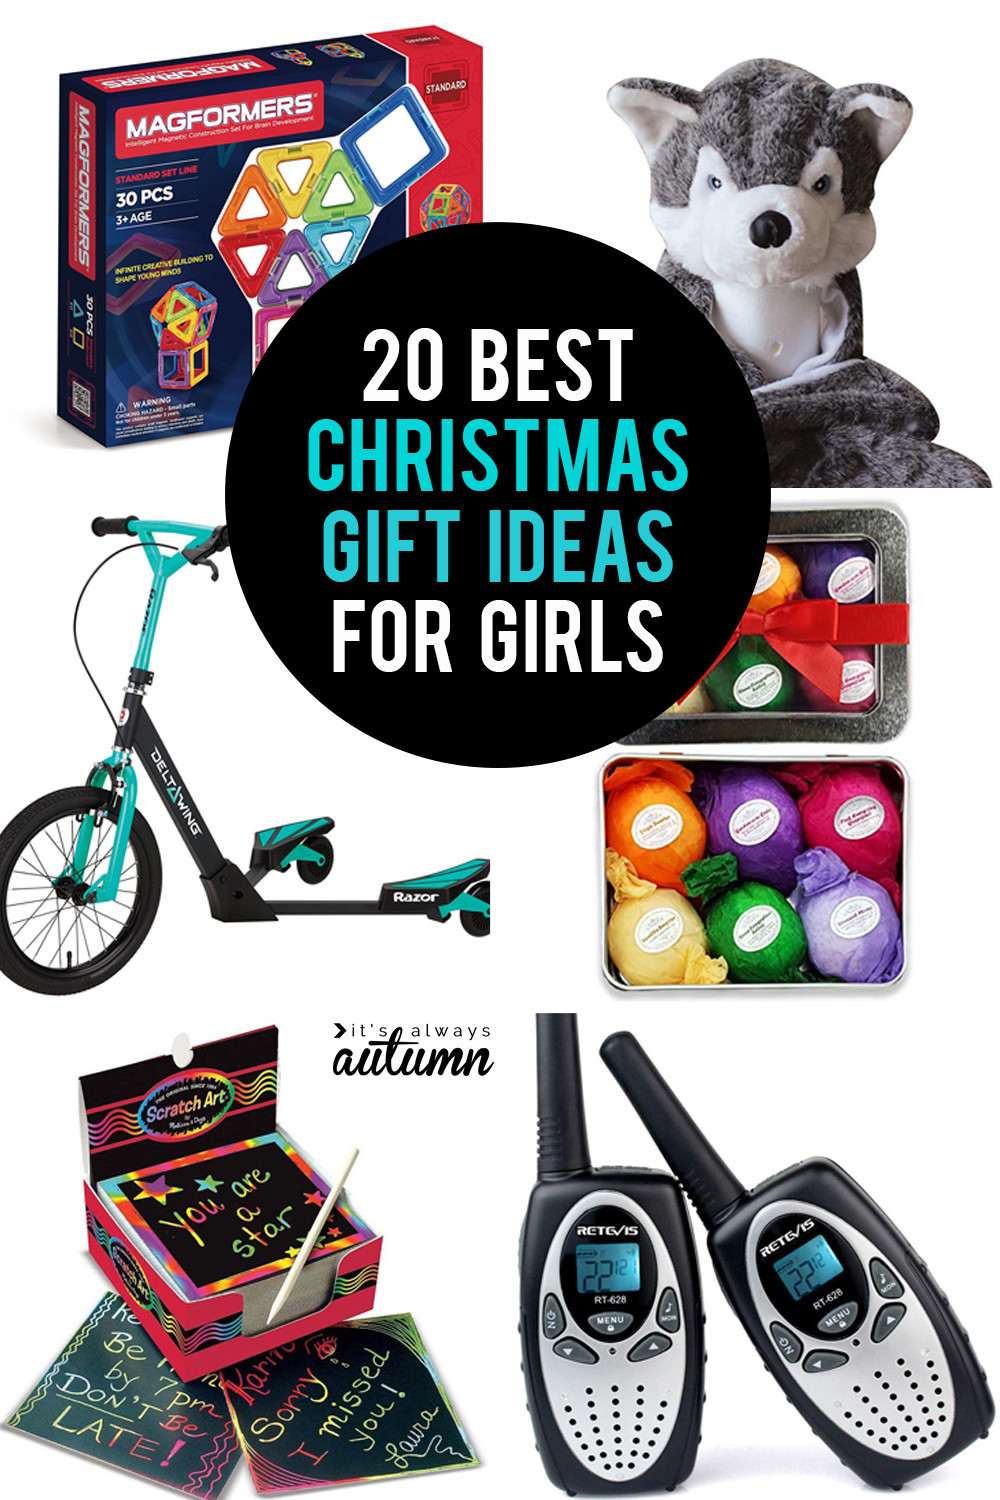 Top 10 Christmas Gifts For Kids
 The 20 best Christmas ts for girls It s Always Autumn